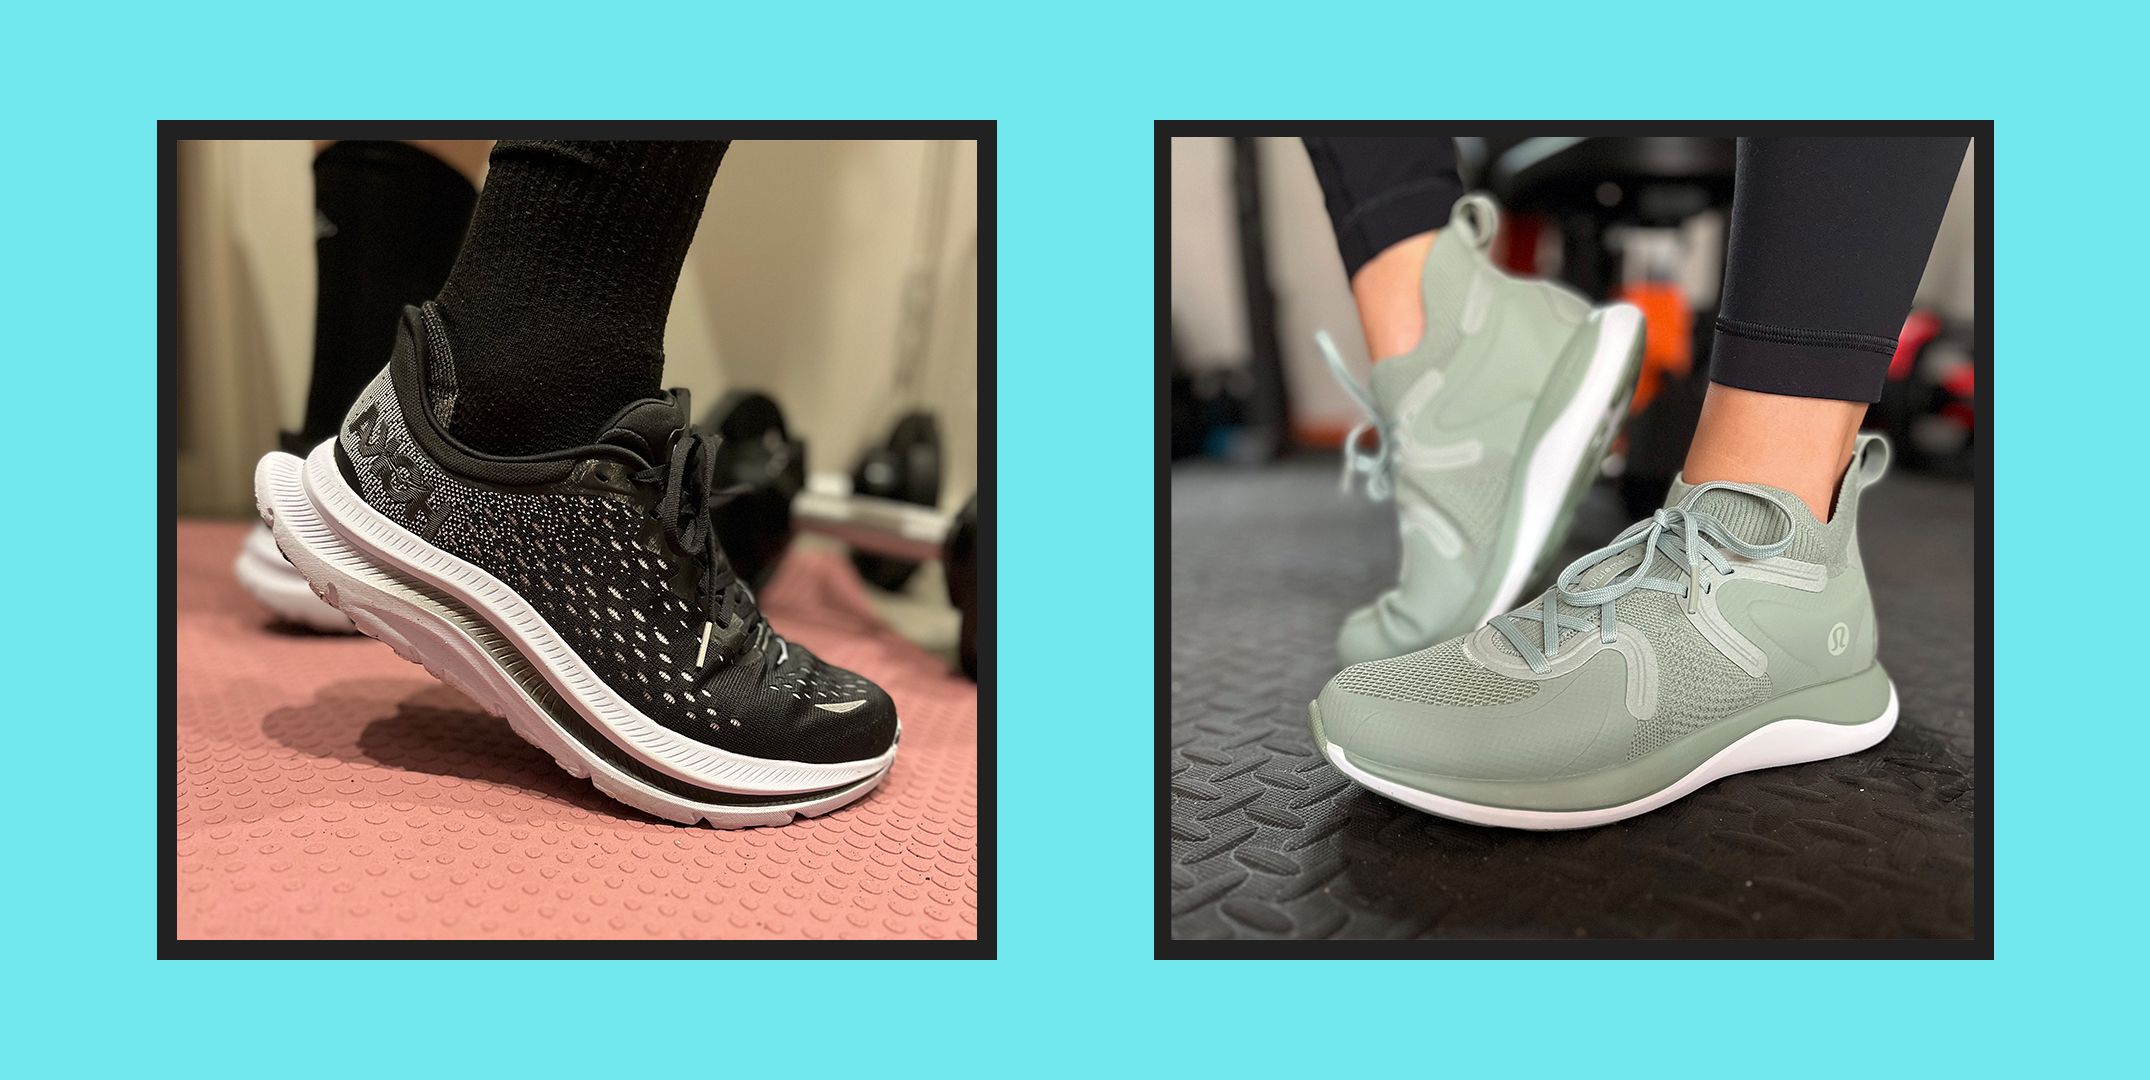 Lululemon Chargefeel Review: Is This Workout Shoe A HIIT?